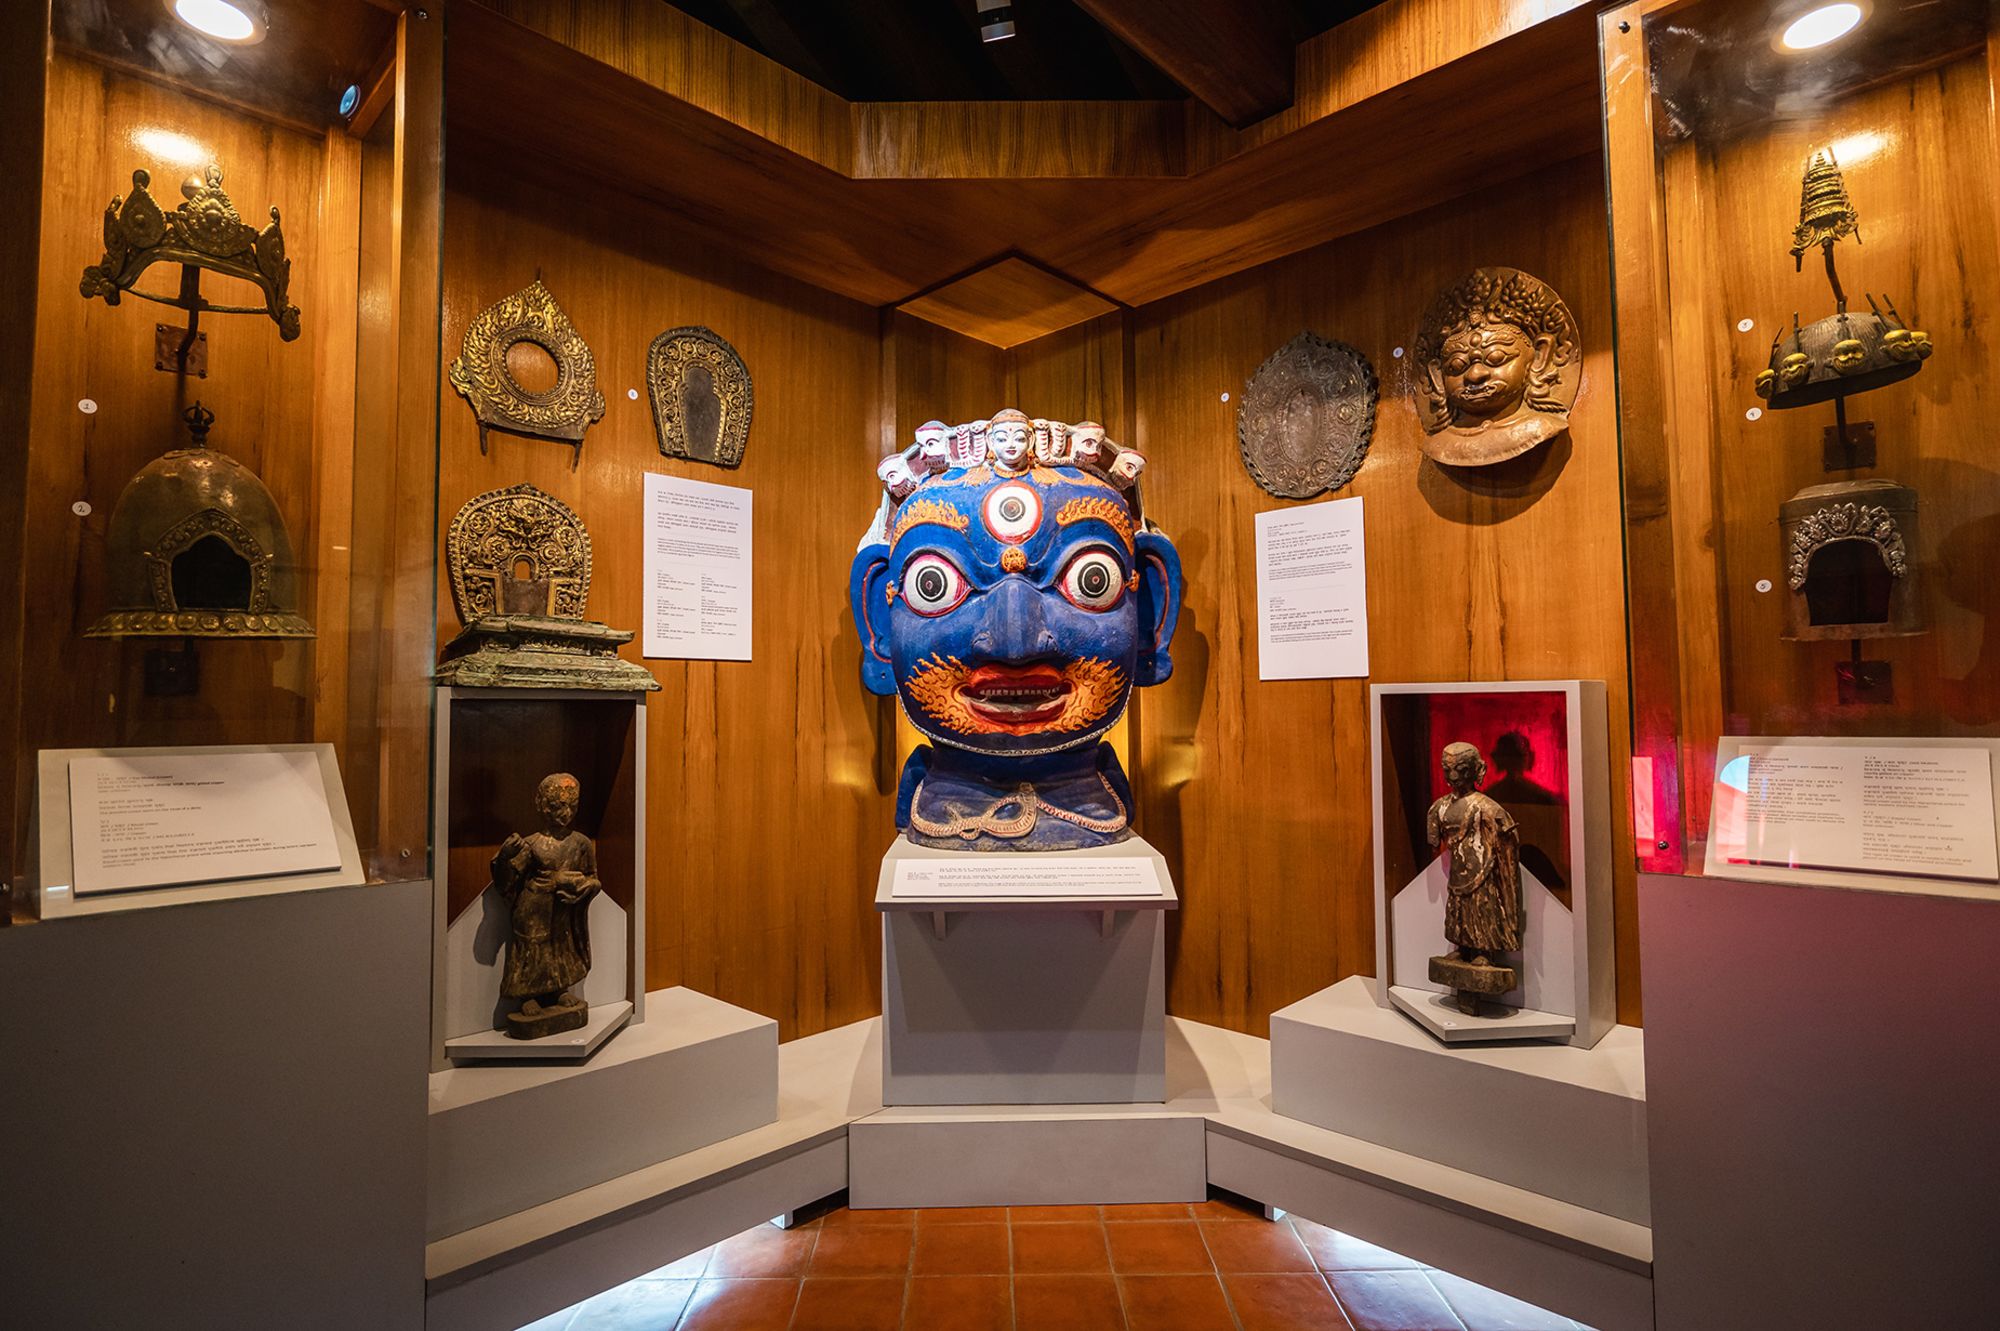 Halos, crowns and sculptures on display at the Itumbaha Museum.